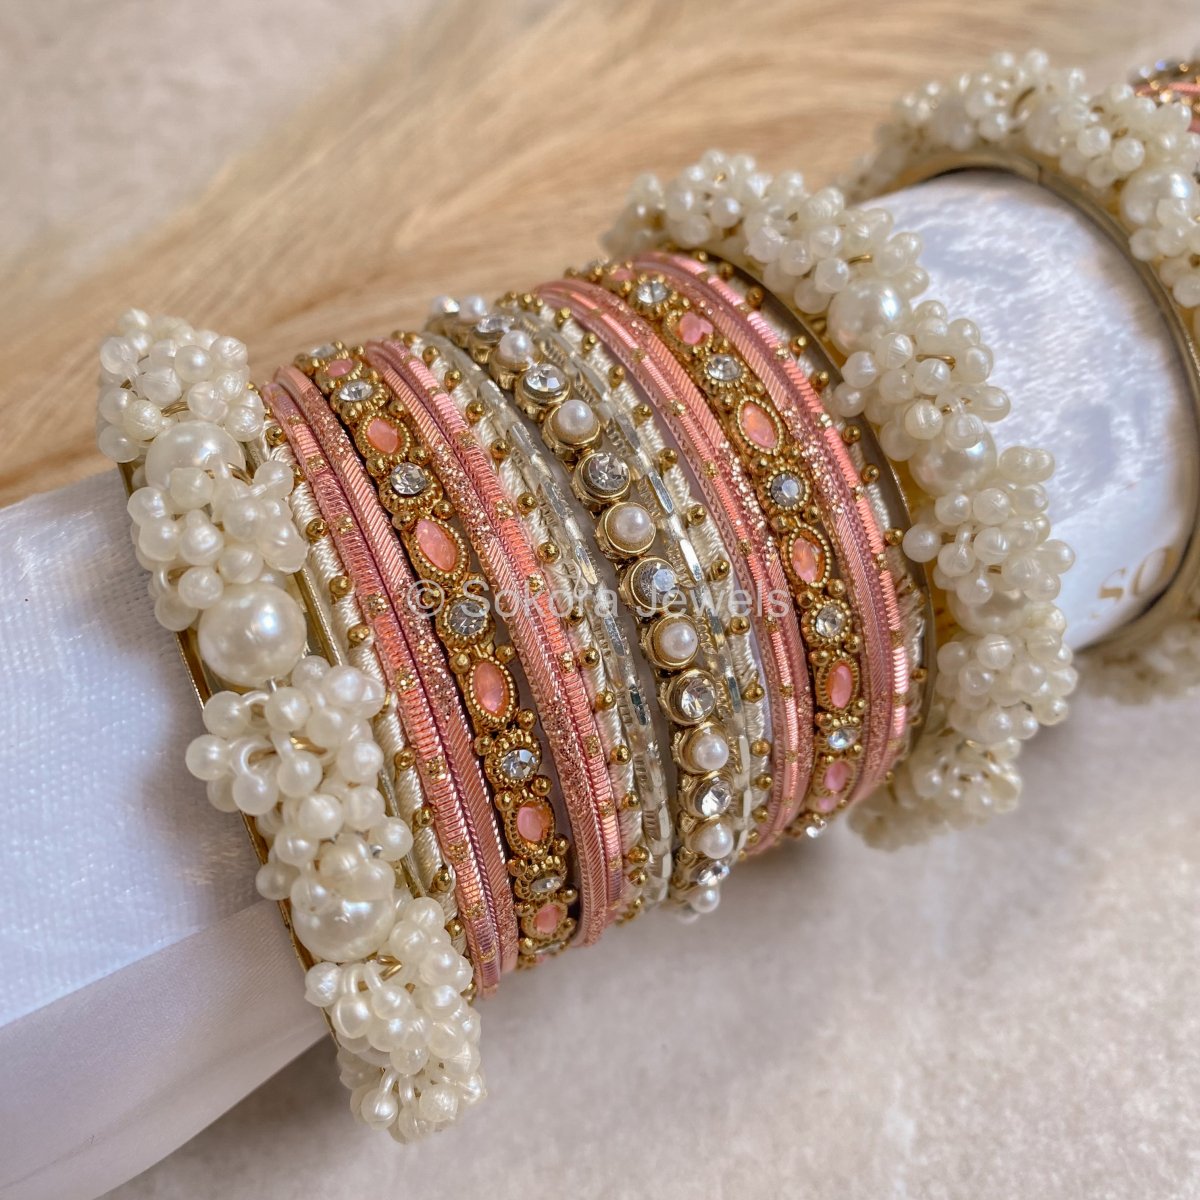 Midi Pearly Cluster Bangle Set - Peachy Pink - SOKORA JEWELSMidi Pearly Cluster Bangle Set - Peachy PinkBANGLES